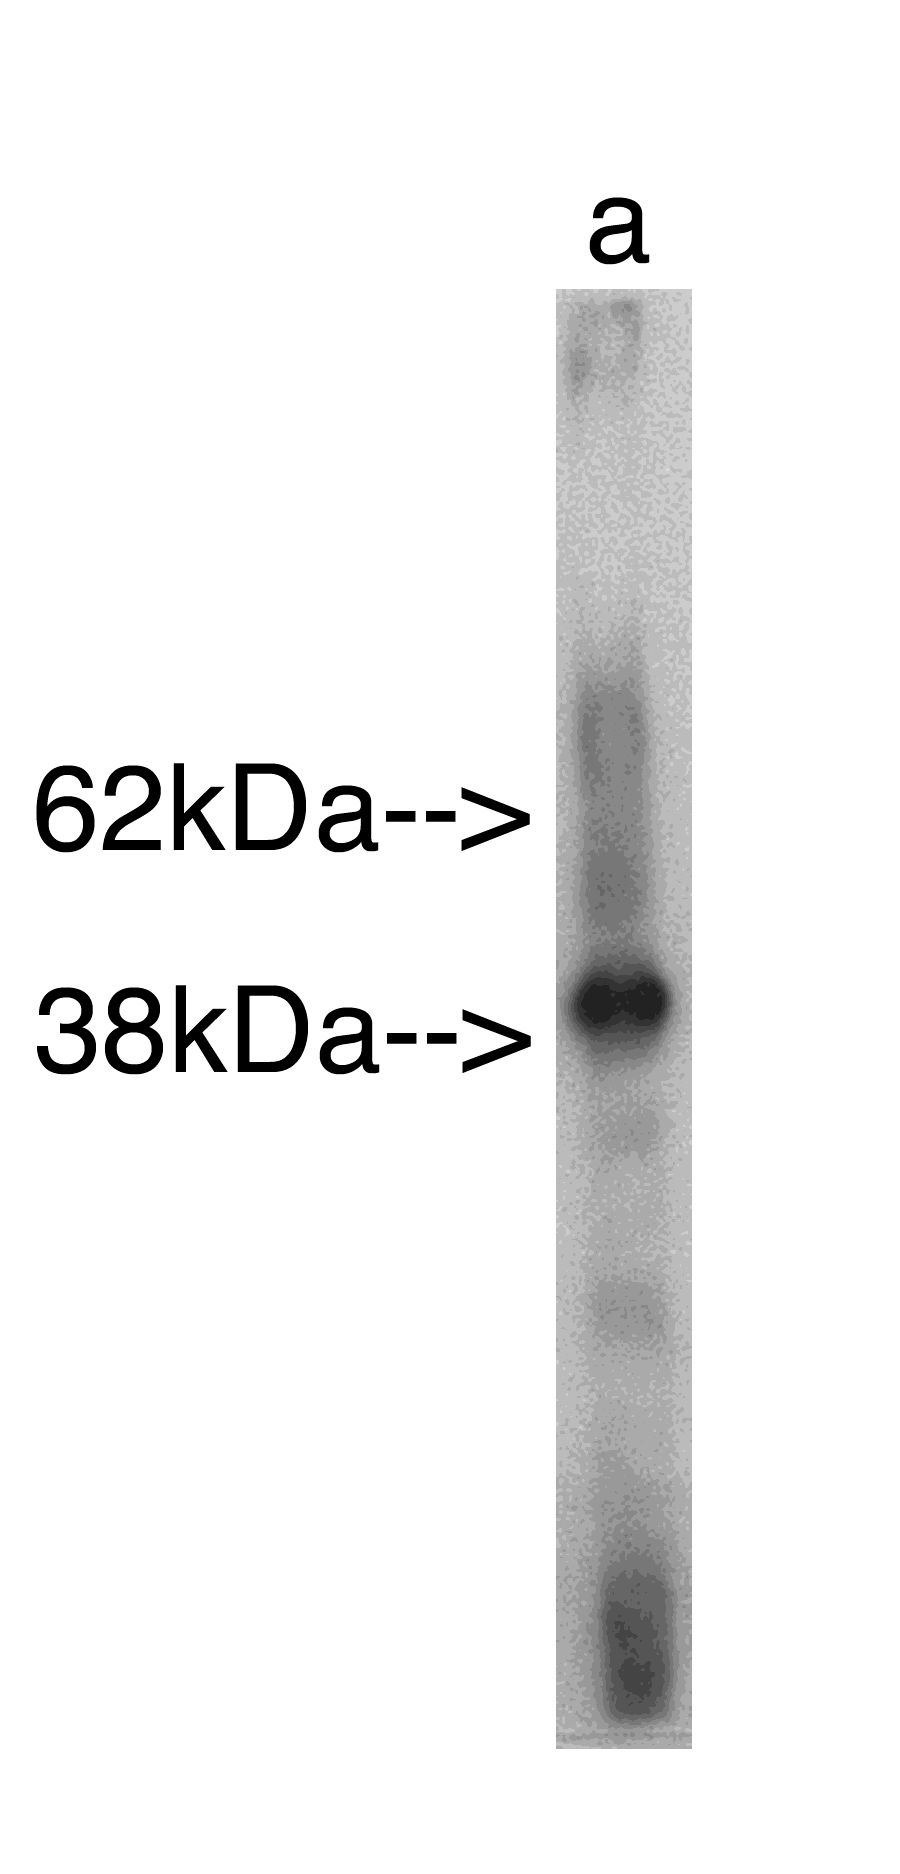 "
Western blot analysis using Sphingomyelin Synthase r (Cat. # X1704P) on recombinant protein Lane A] antibody alone. Anti Rabbit secondary used at 1:25K Exposure for 30 seconds

"